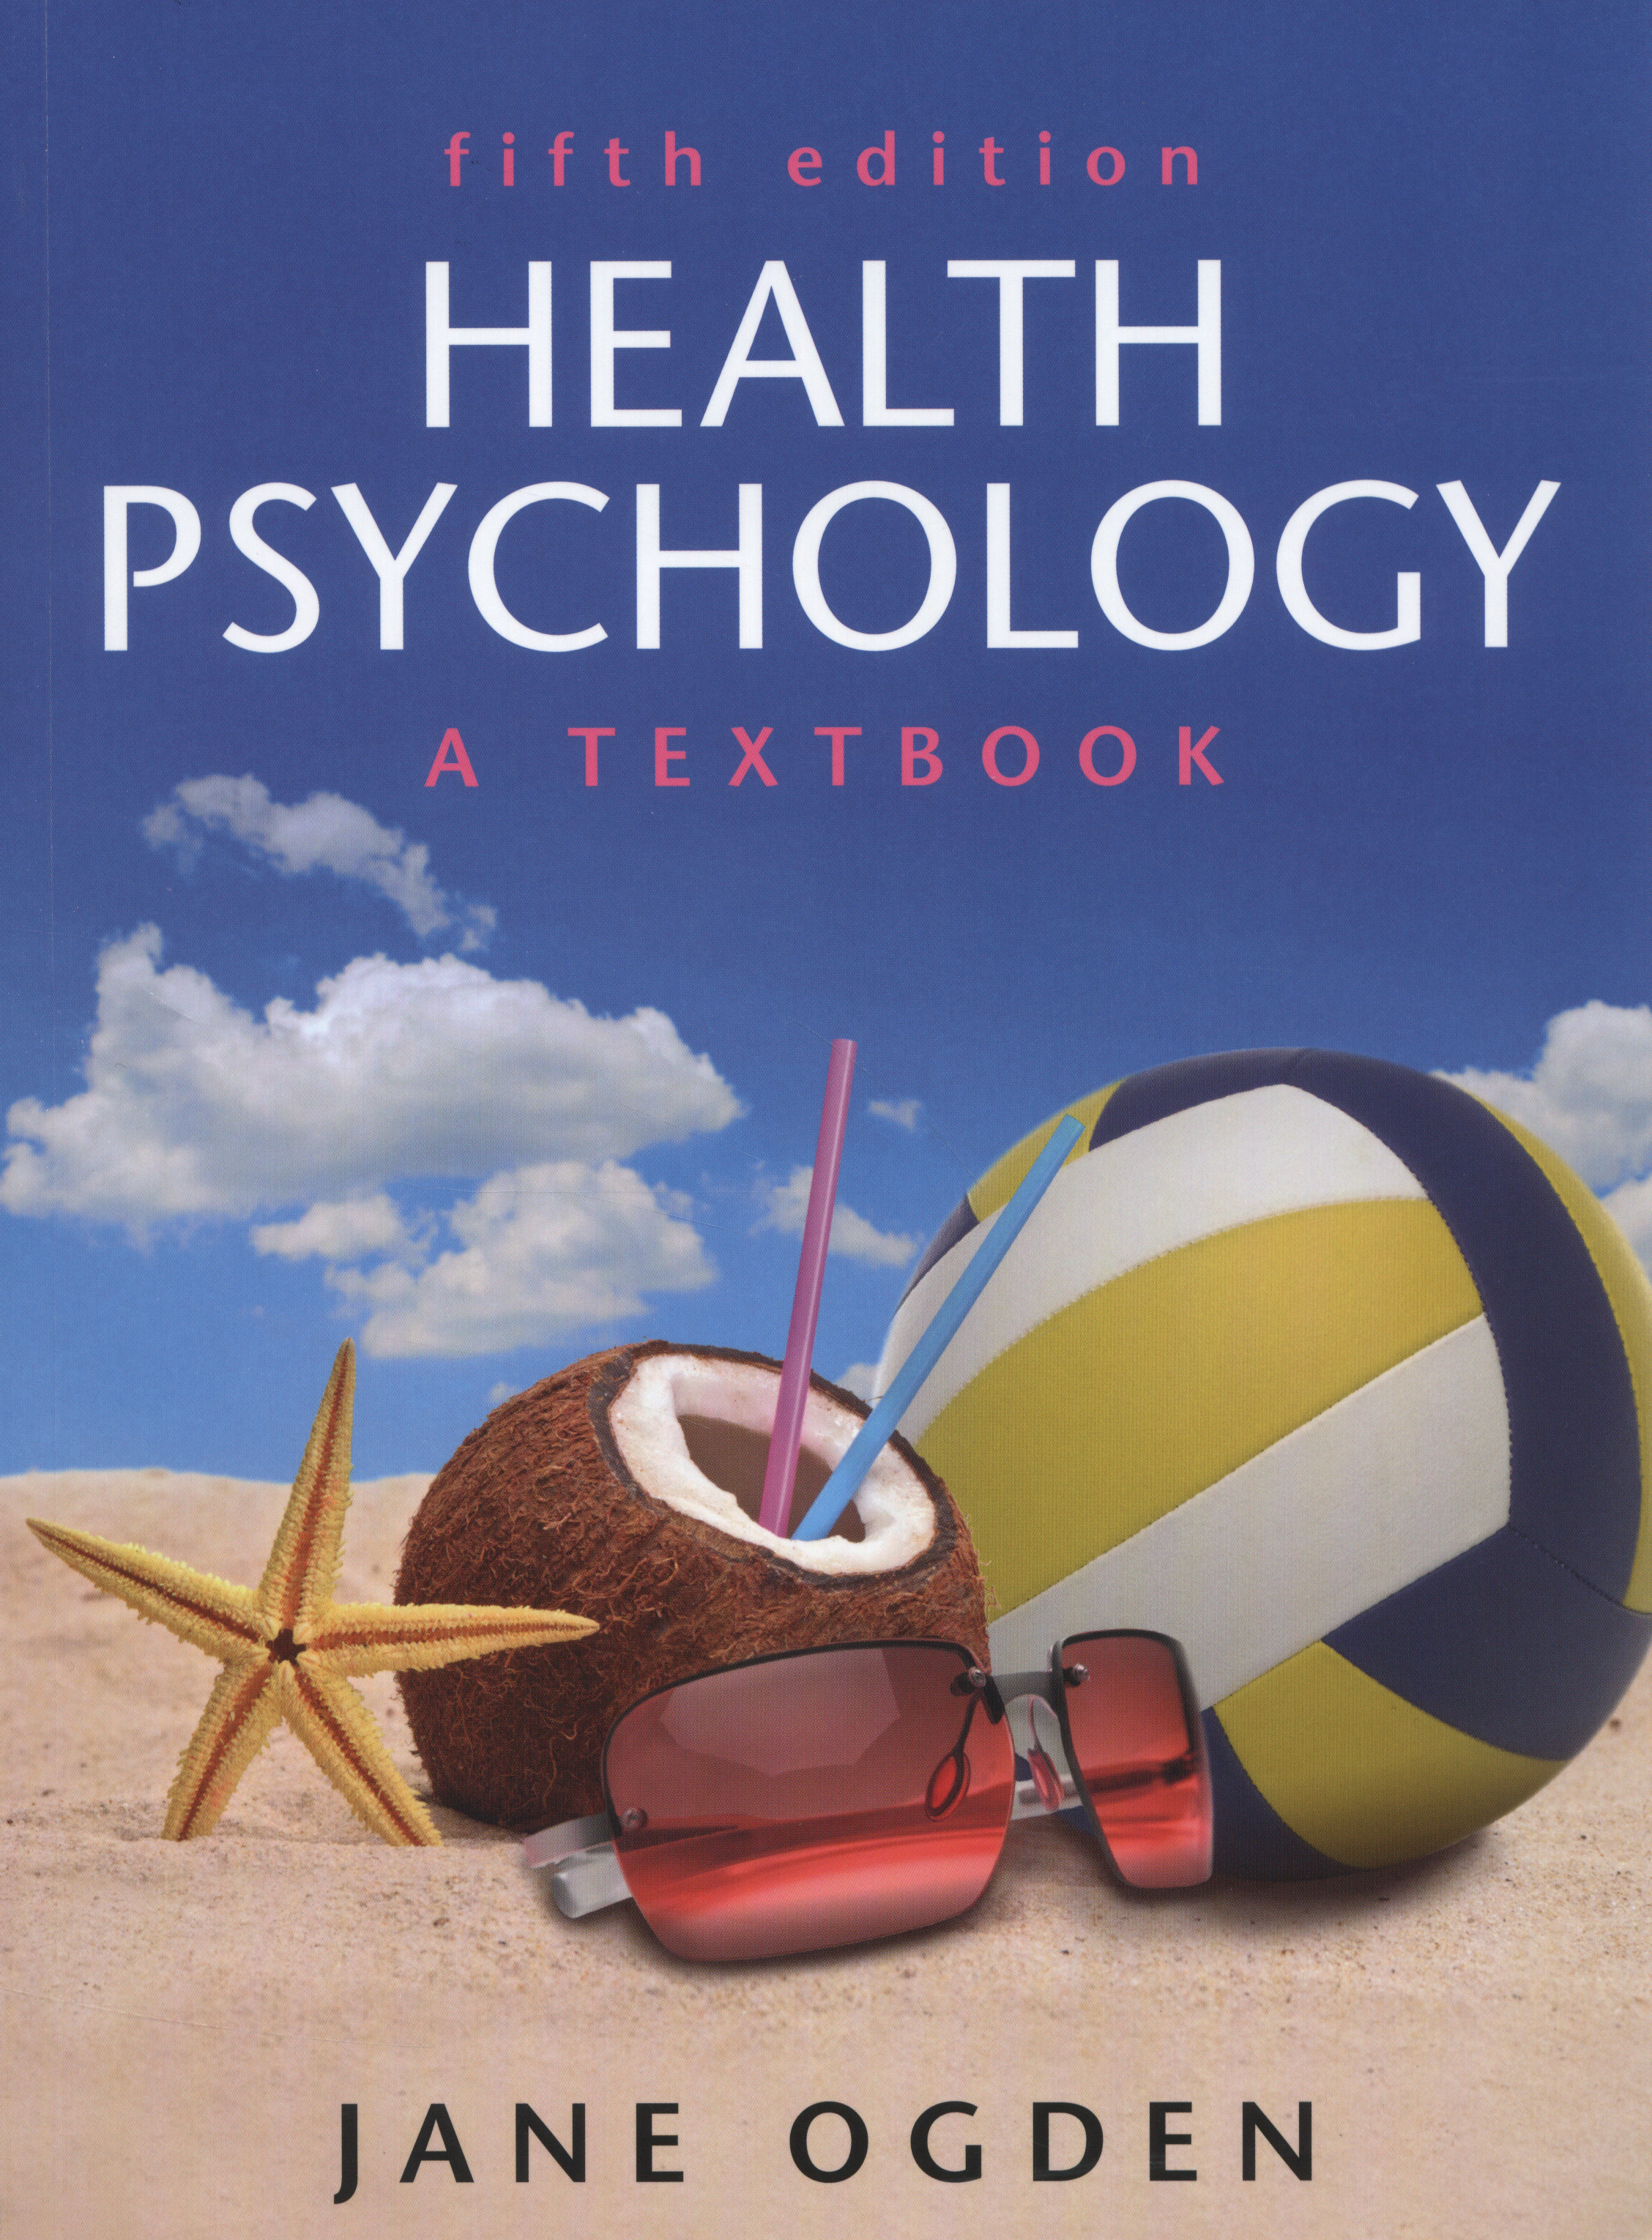 research on health psychology